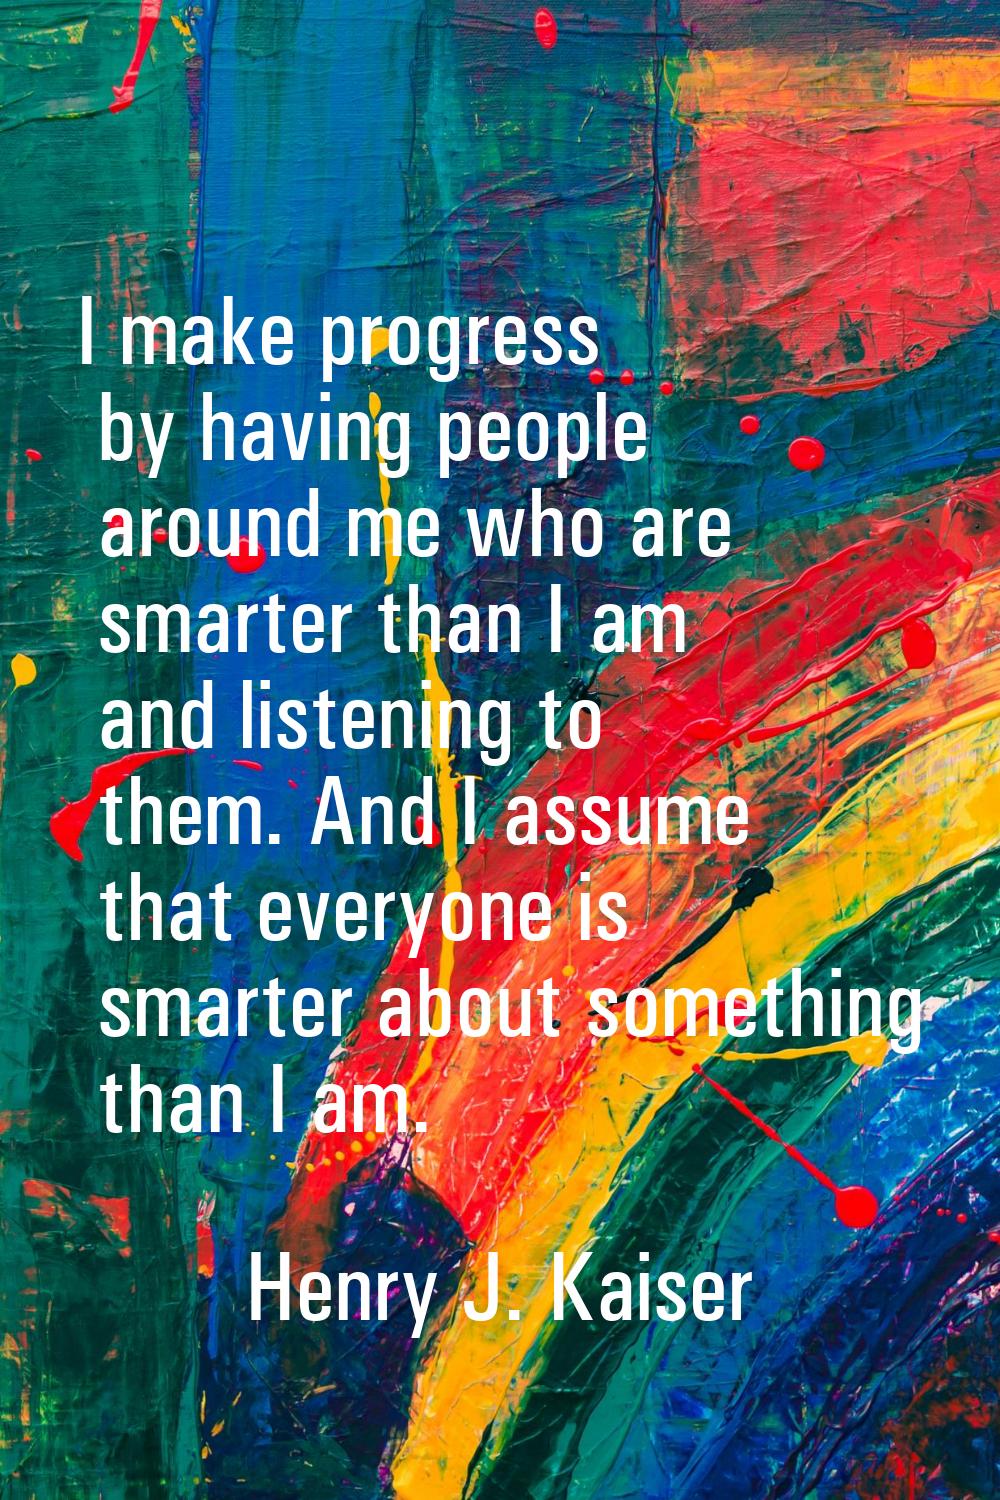 I make progress by having people around me who are smarter than I am and listening to them. And I a